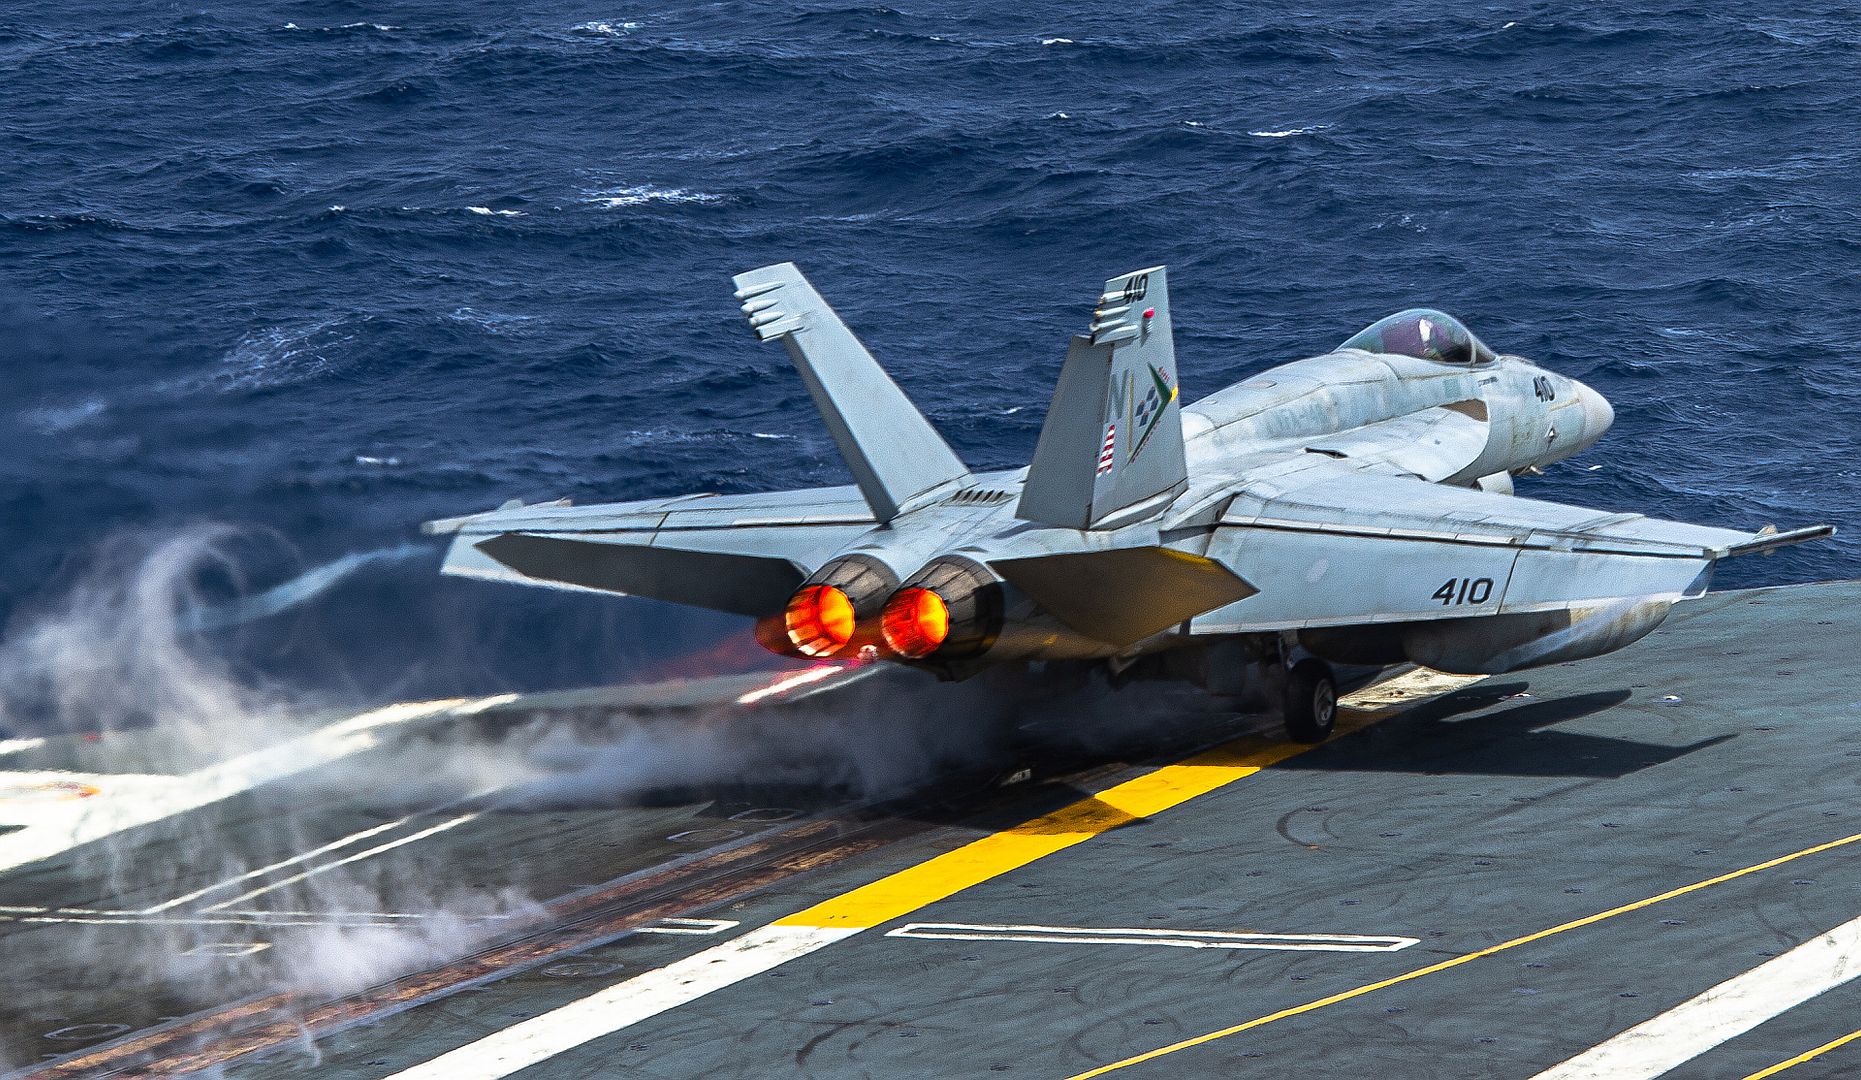 18E Super Hornet From The Blue Diamonds Of Strike Fighter Squadron 146 Launches From The Flight Deck Of The Aircraft Carrier USS Nimitz M3gngUMQdo1aN7XRcZHVoS